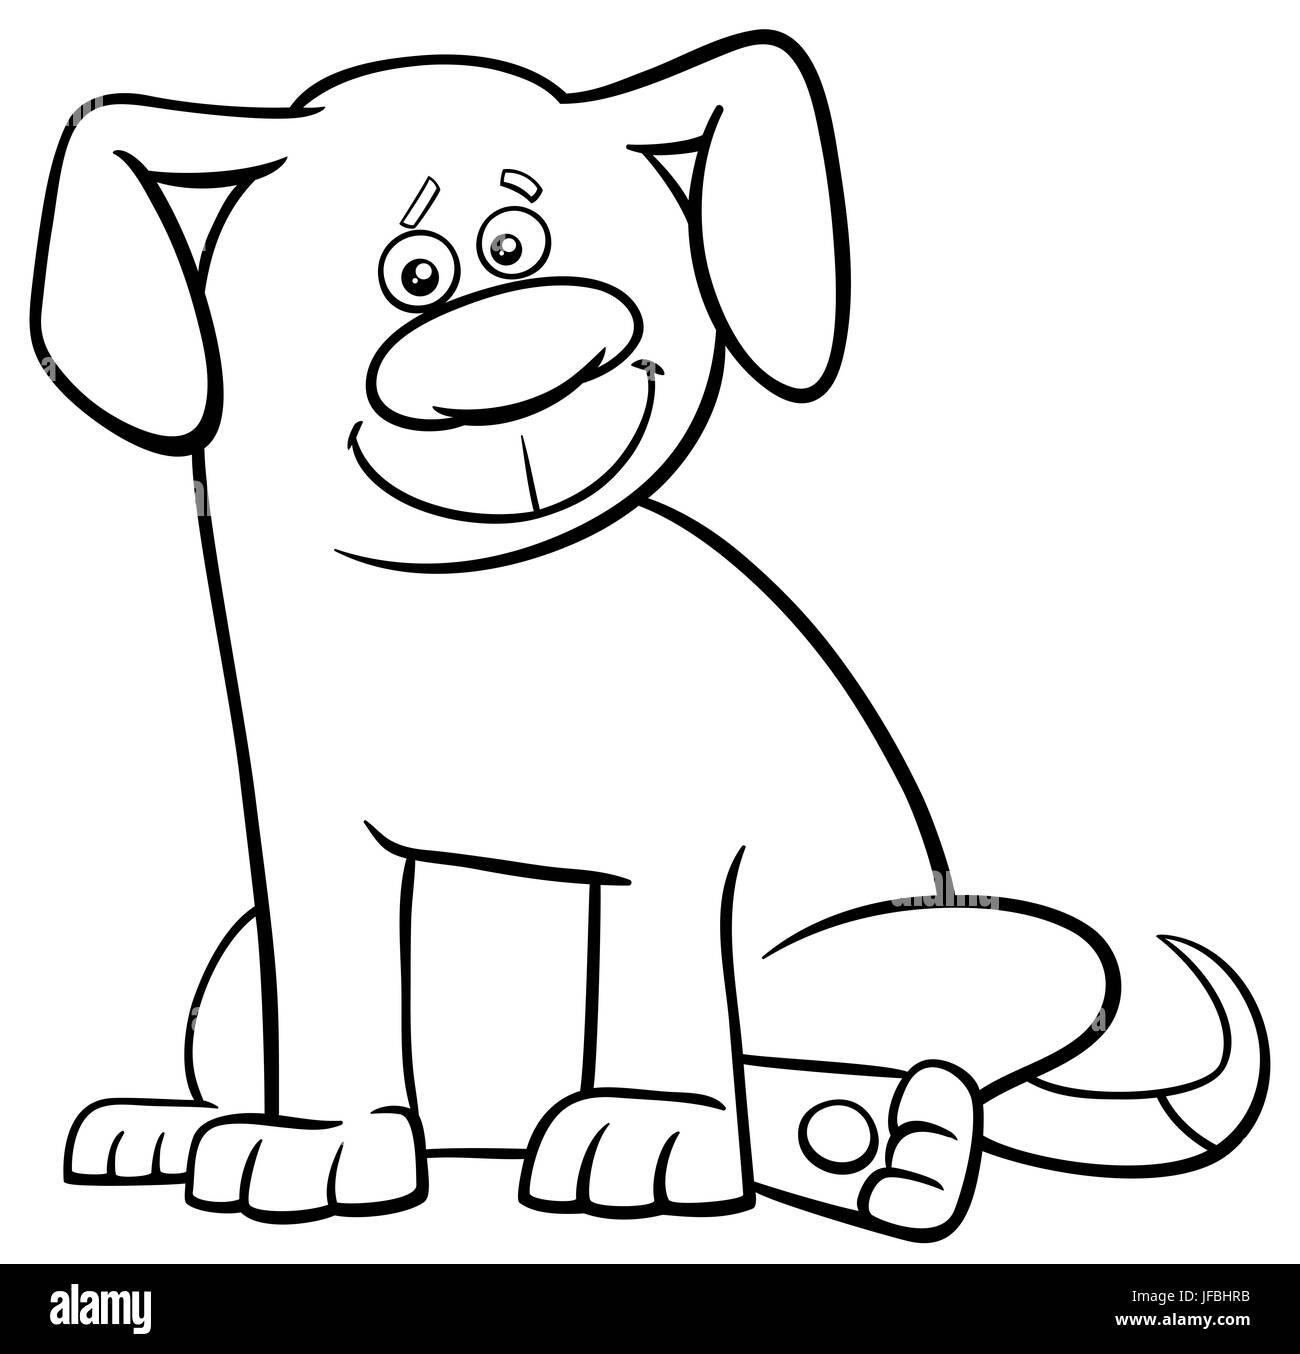 dog character coloring page Stock Photo